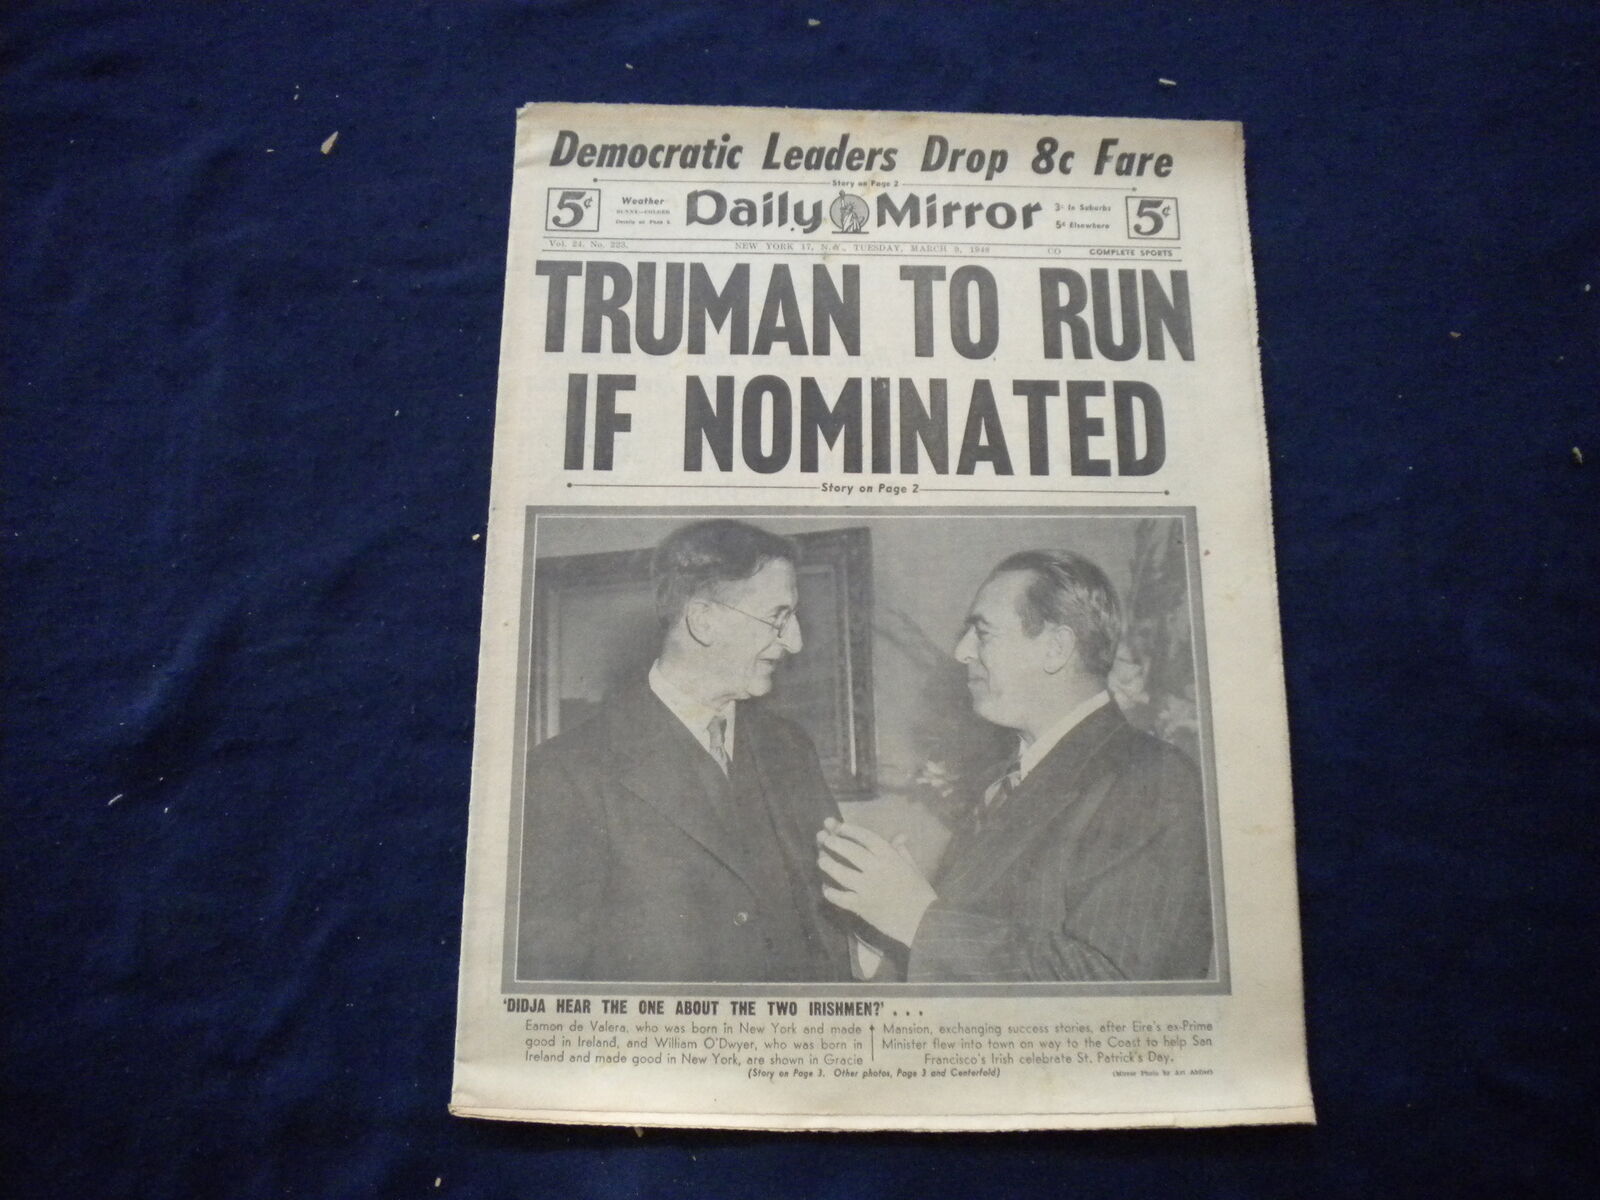 1948 MAR 9 NEW YORK DAILY MIRROR NEWSPAPER - TRUMAN TO RUN IF NOMINATED- NP 5996